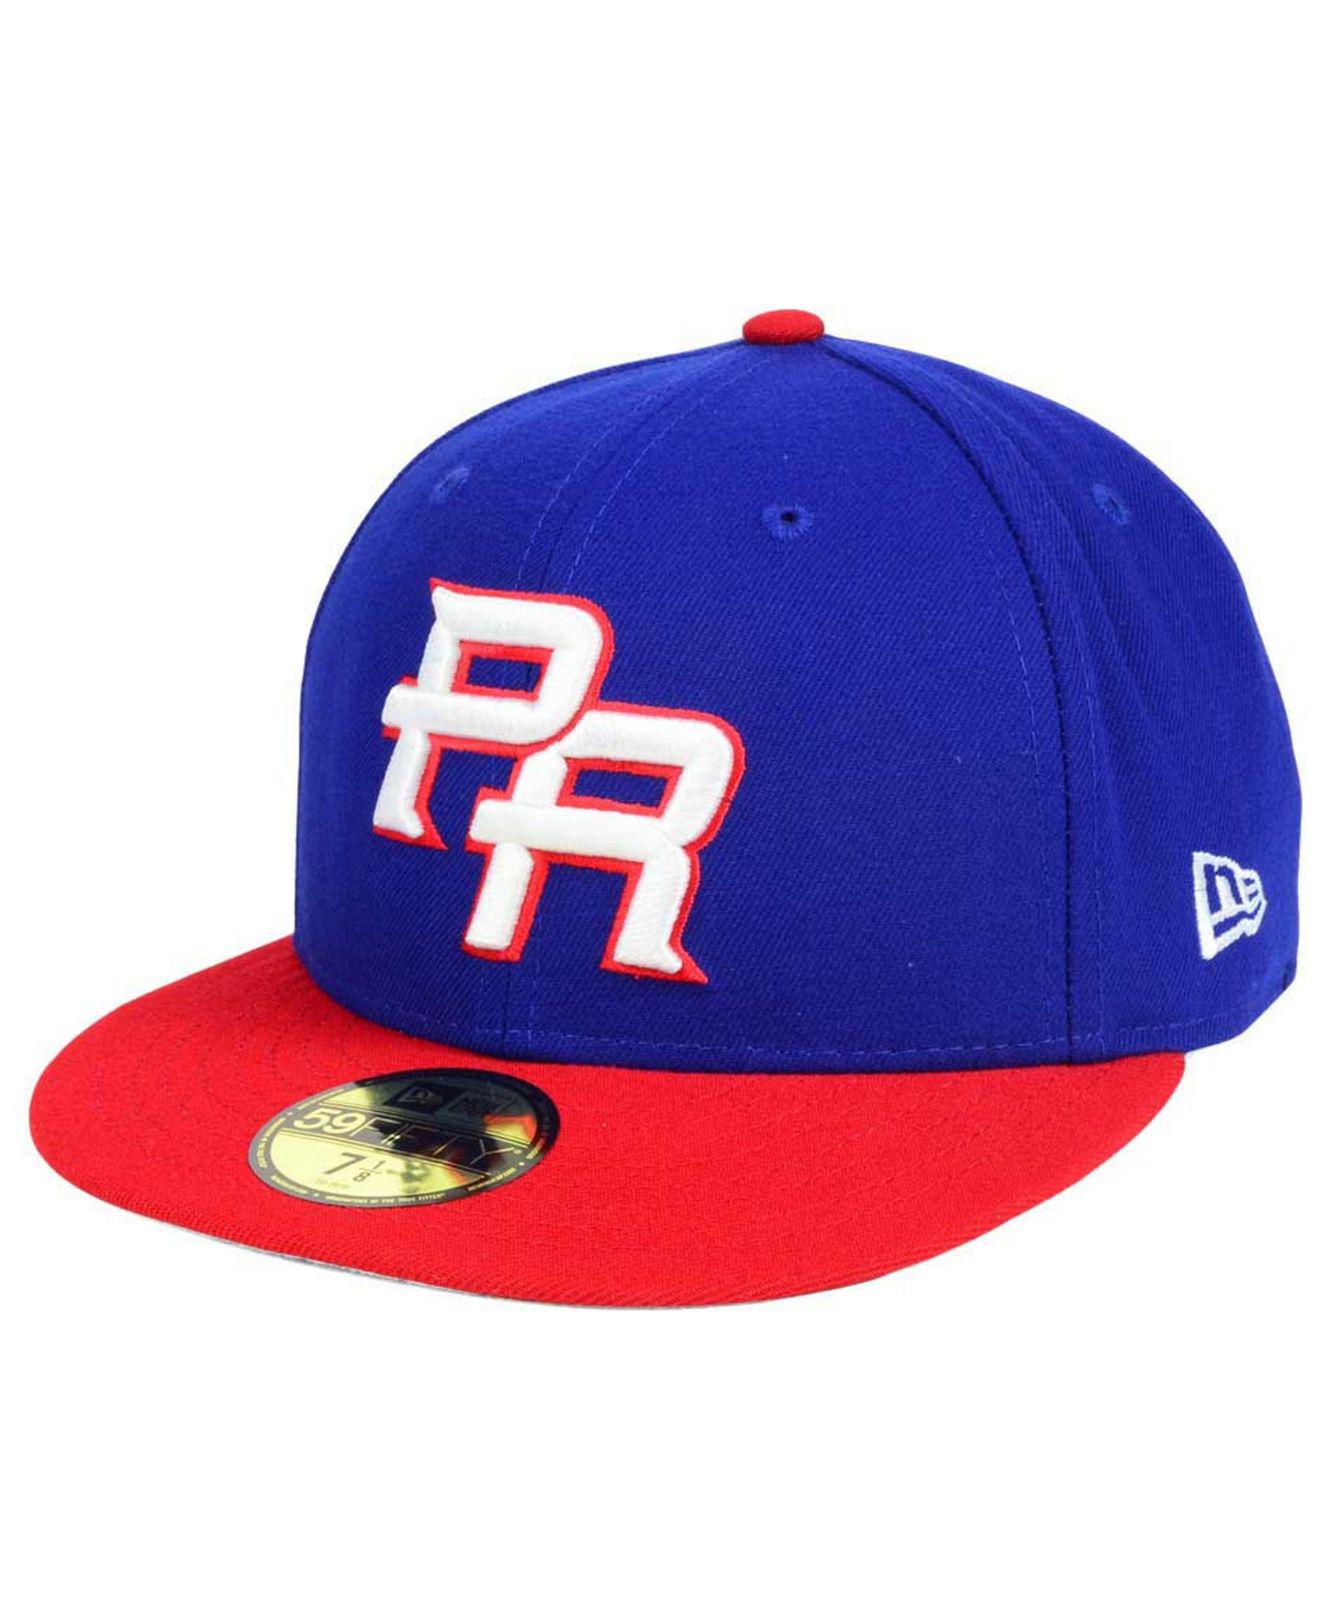 KTZ Puerto Rico World Baseball Classic 59fifty Fitted Cap in Blue for